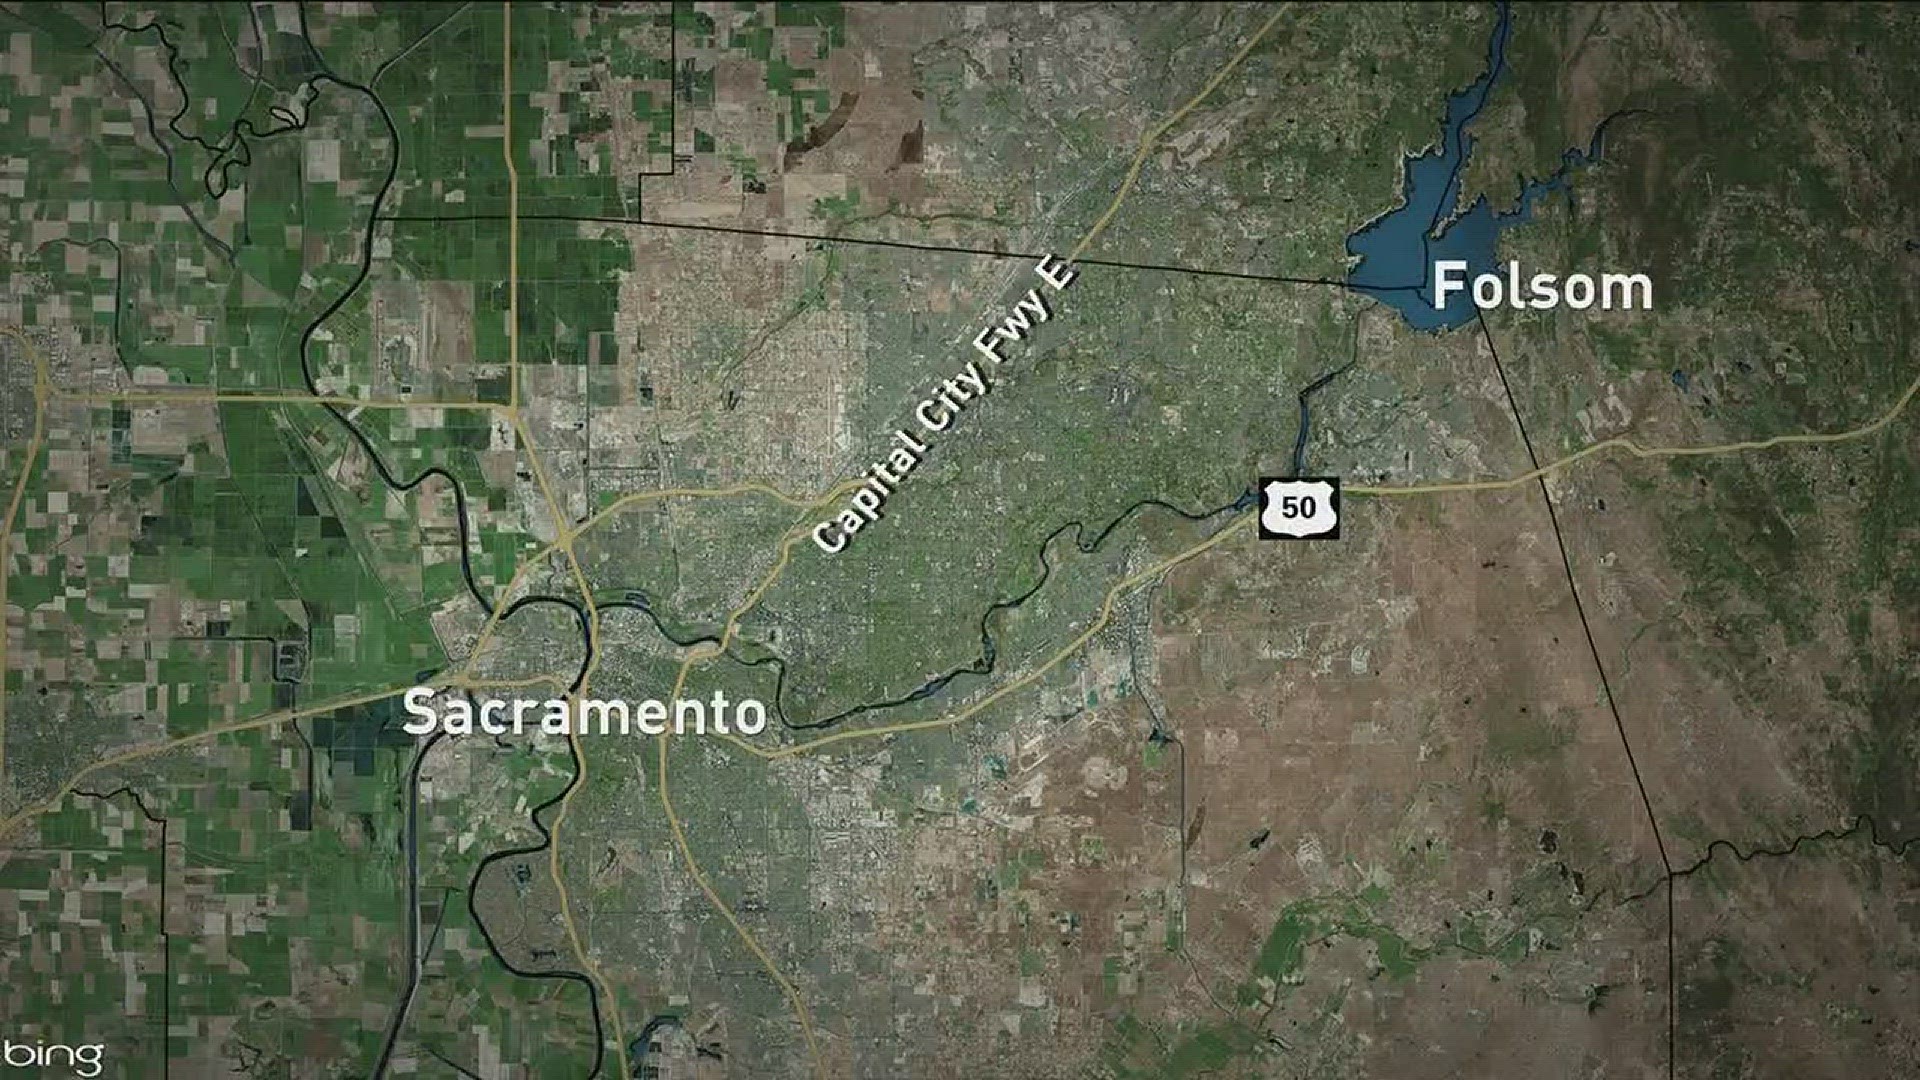 A 13-year-old is still missing after he was swept down stream from Rainbow Bridge in Folsom (May 2, 2017)